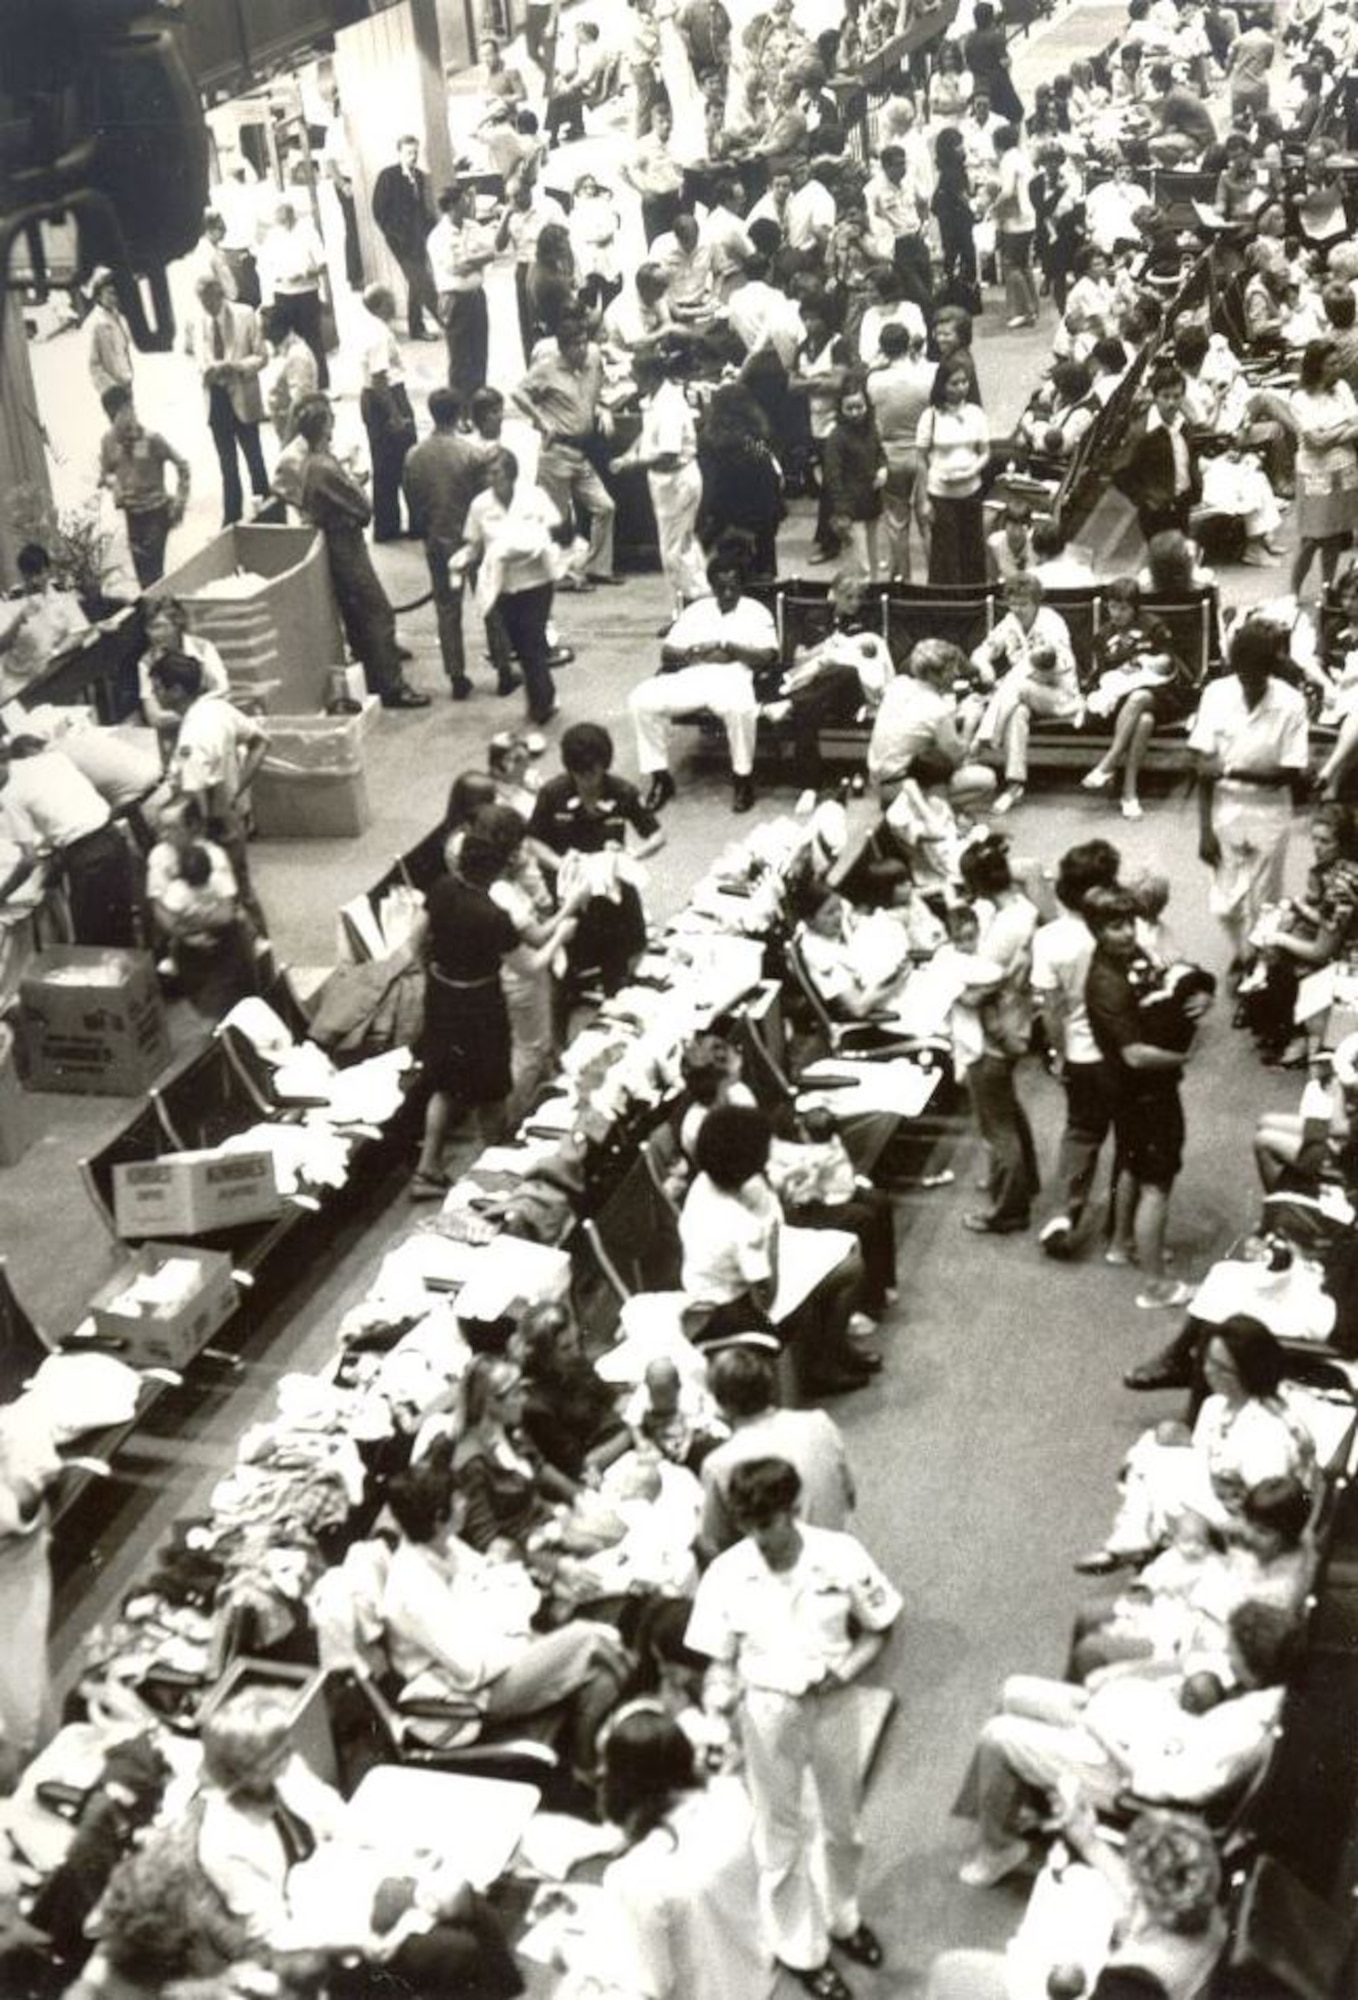 On 5 April 1975, the first plane full of Operation Baby Lift babies arrived at the Honolulu International Airport.  That night “temporary mothers and fathers” took care of the over 400 babies at in the airports holding area set up by Customs and Immigrations Officials until the aircraft departed the next morning.(U.S. Air Force photo provided by 15 WG historian office)